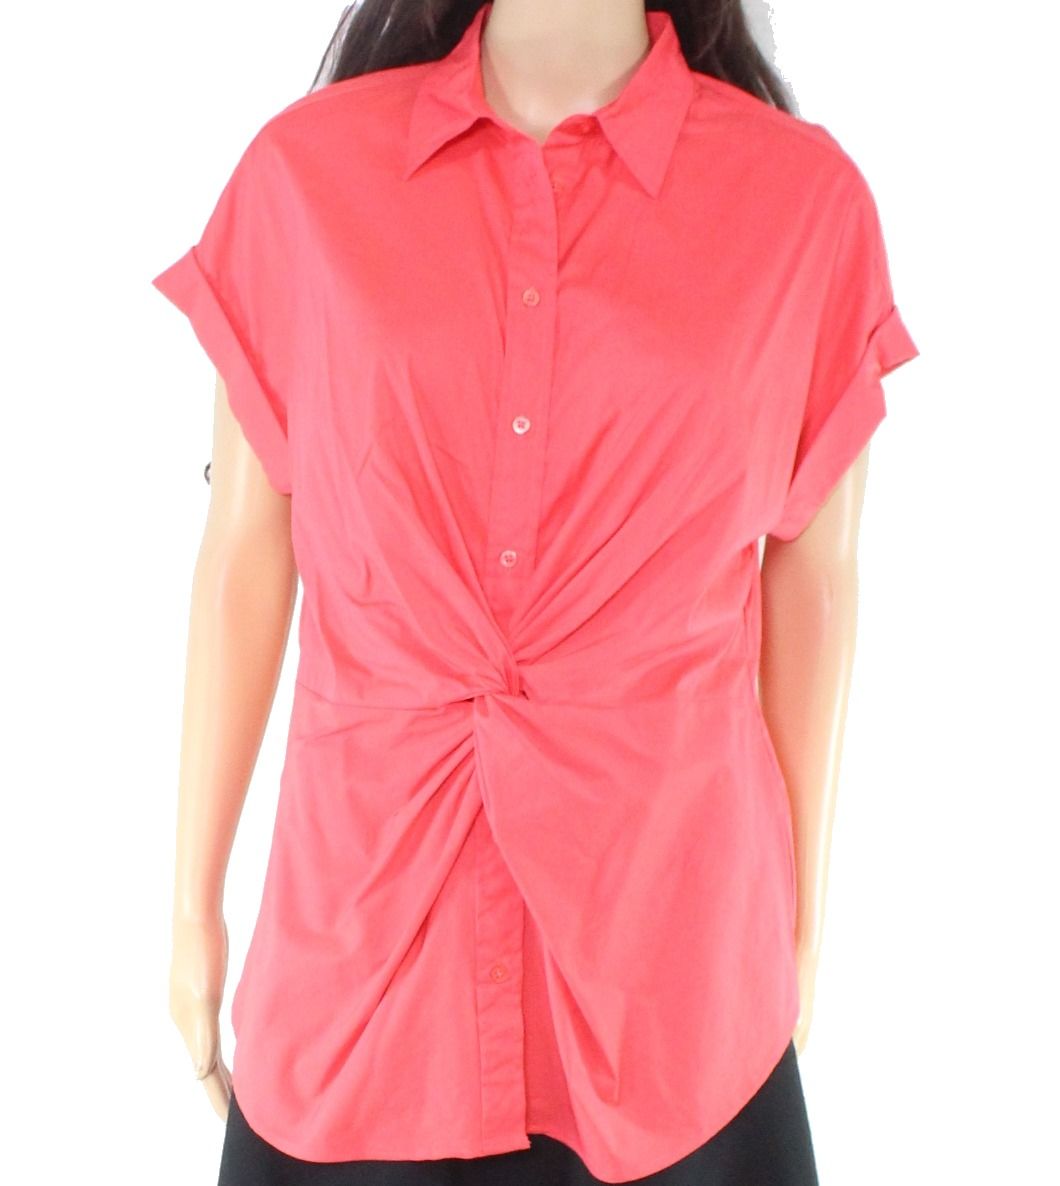 Color: Pinks Size Type: Regular Size (Women's): M Sleeve Length: Short Sleeve Type: Button-Up Style: Basic Neckline: Collared Pattern: Solid Theme: Classic Material: Cotton Blends